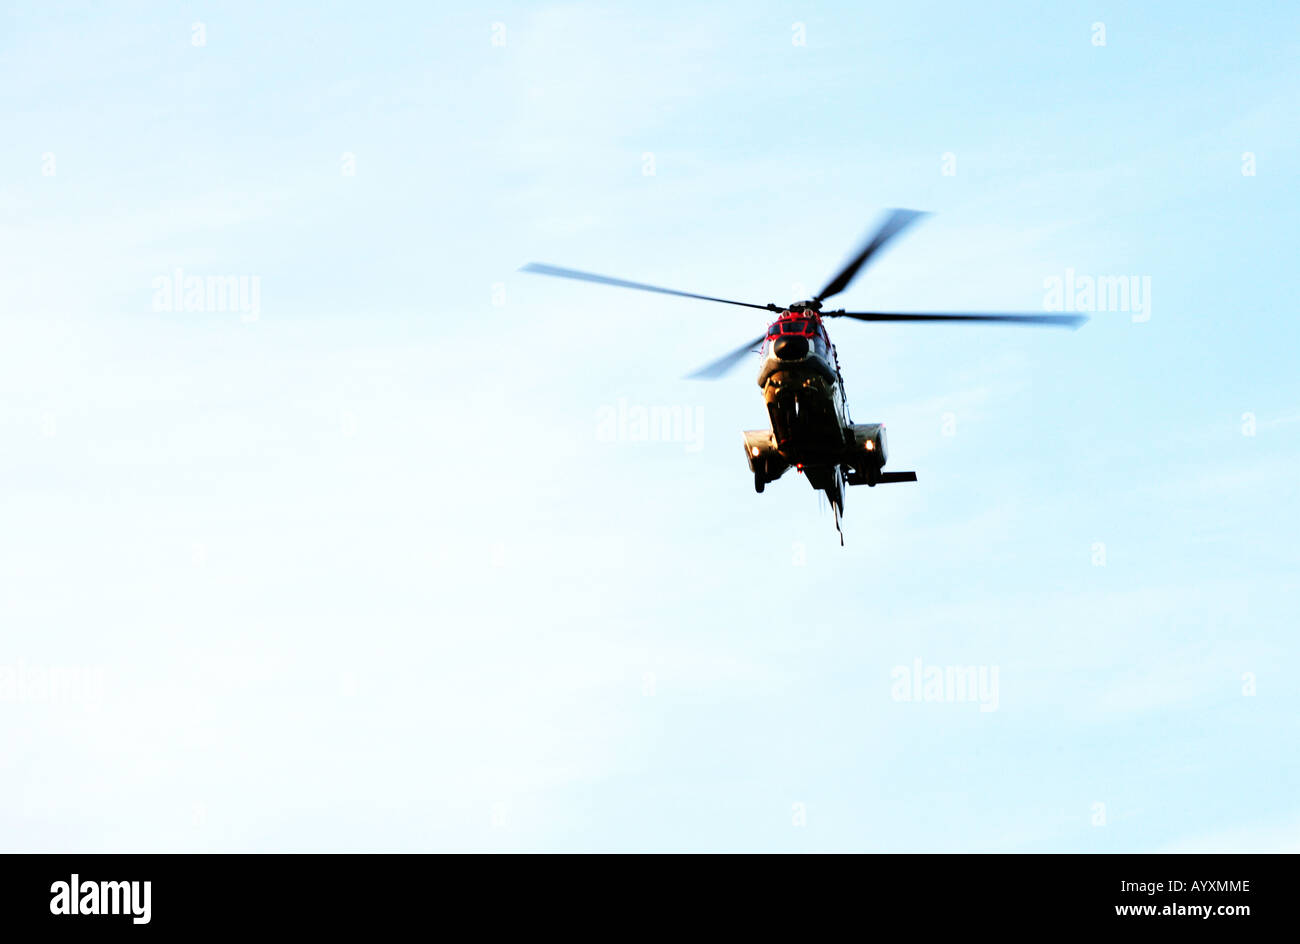 An image of a helicopter taken from underneath appraoching to land at Aberdeen Airport, Scotland Stock Photo